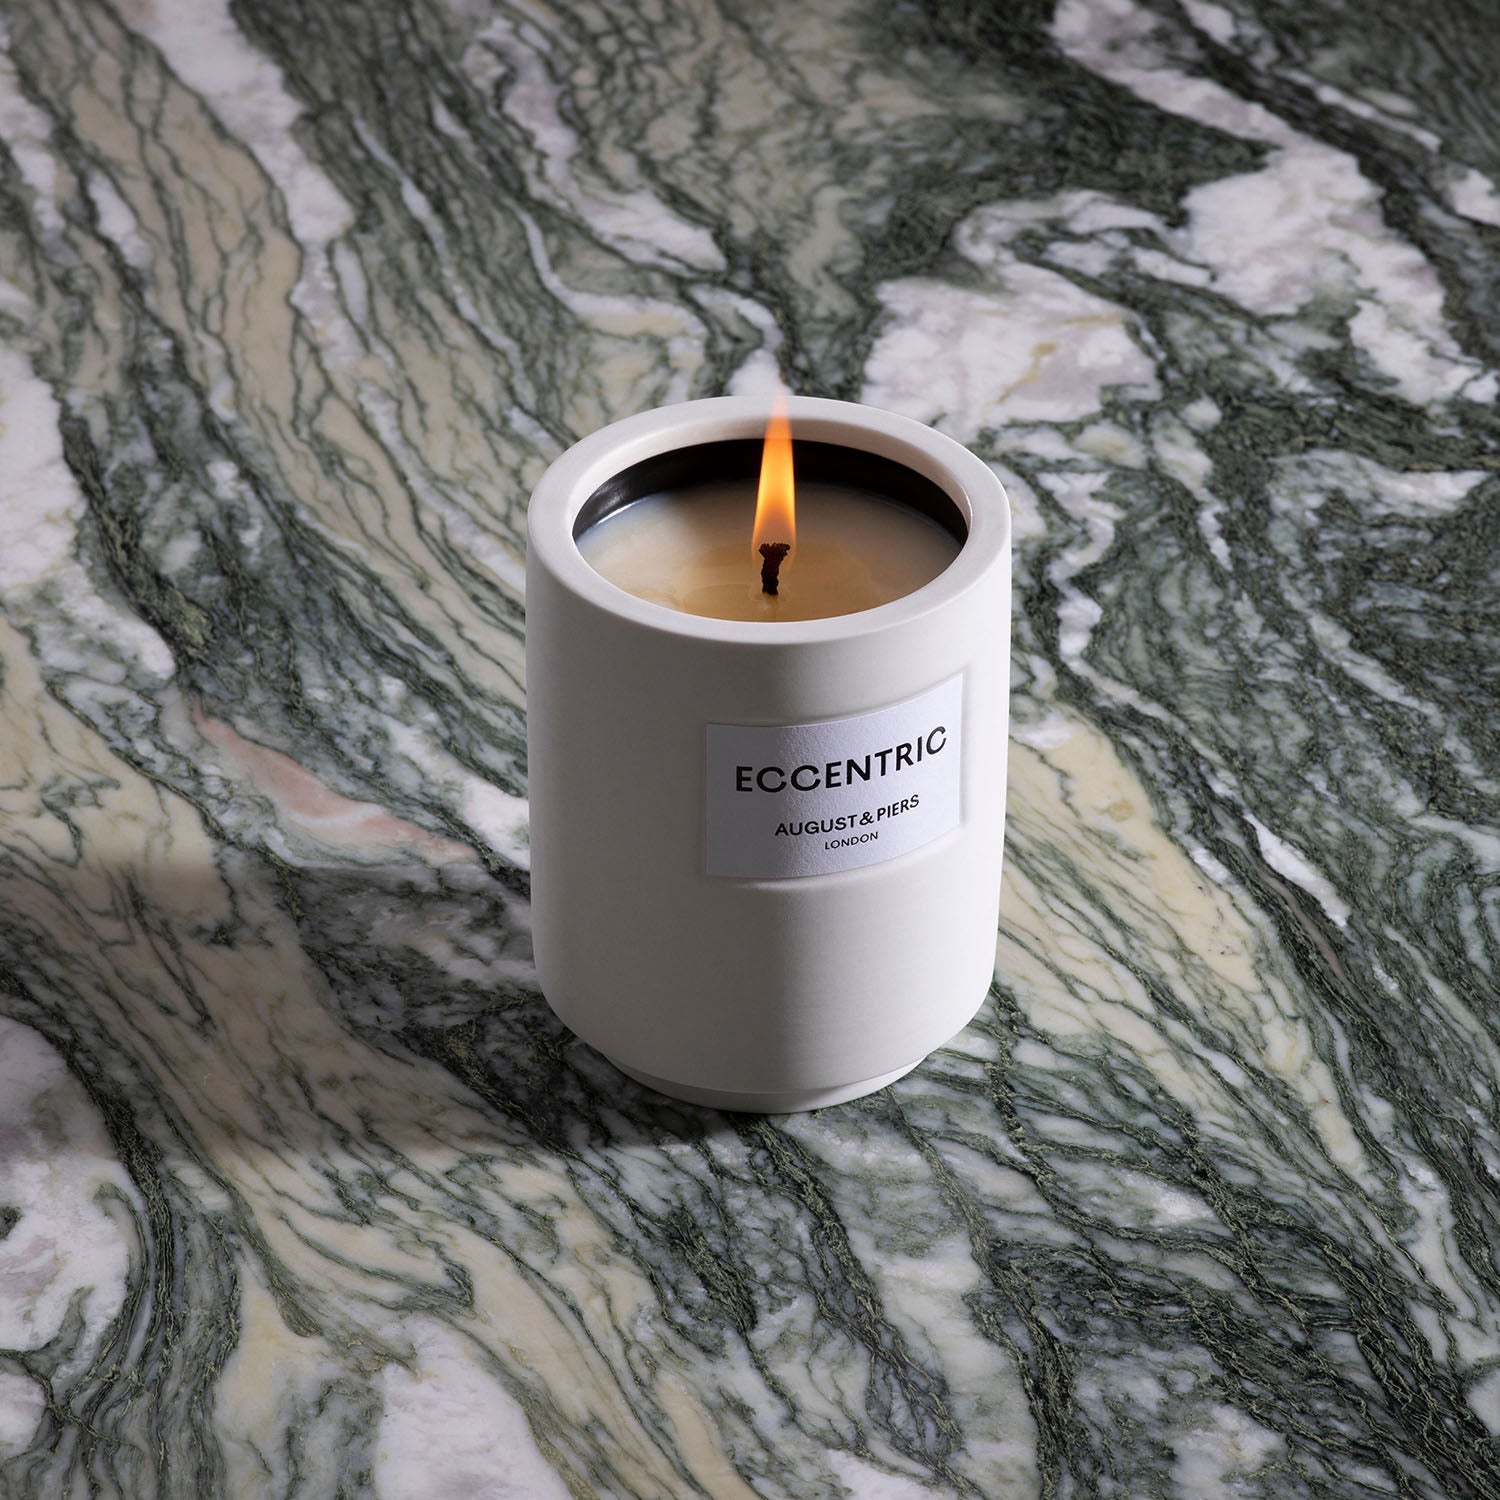 August & Piers Eccentric Scented Candle